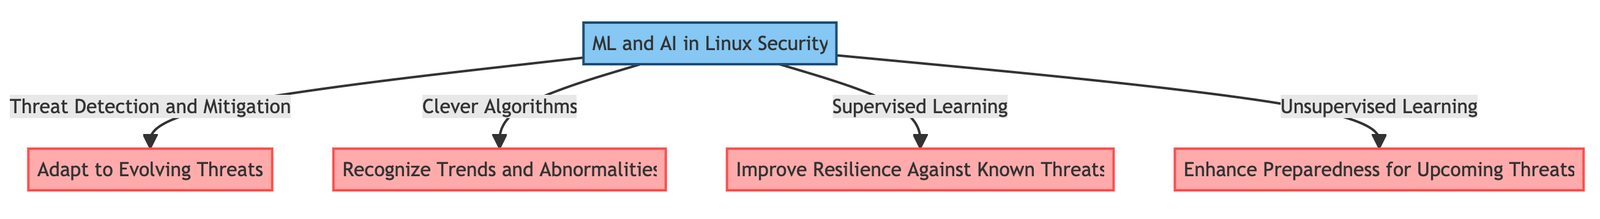 A diagram of a security system

Description automatically generated